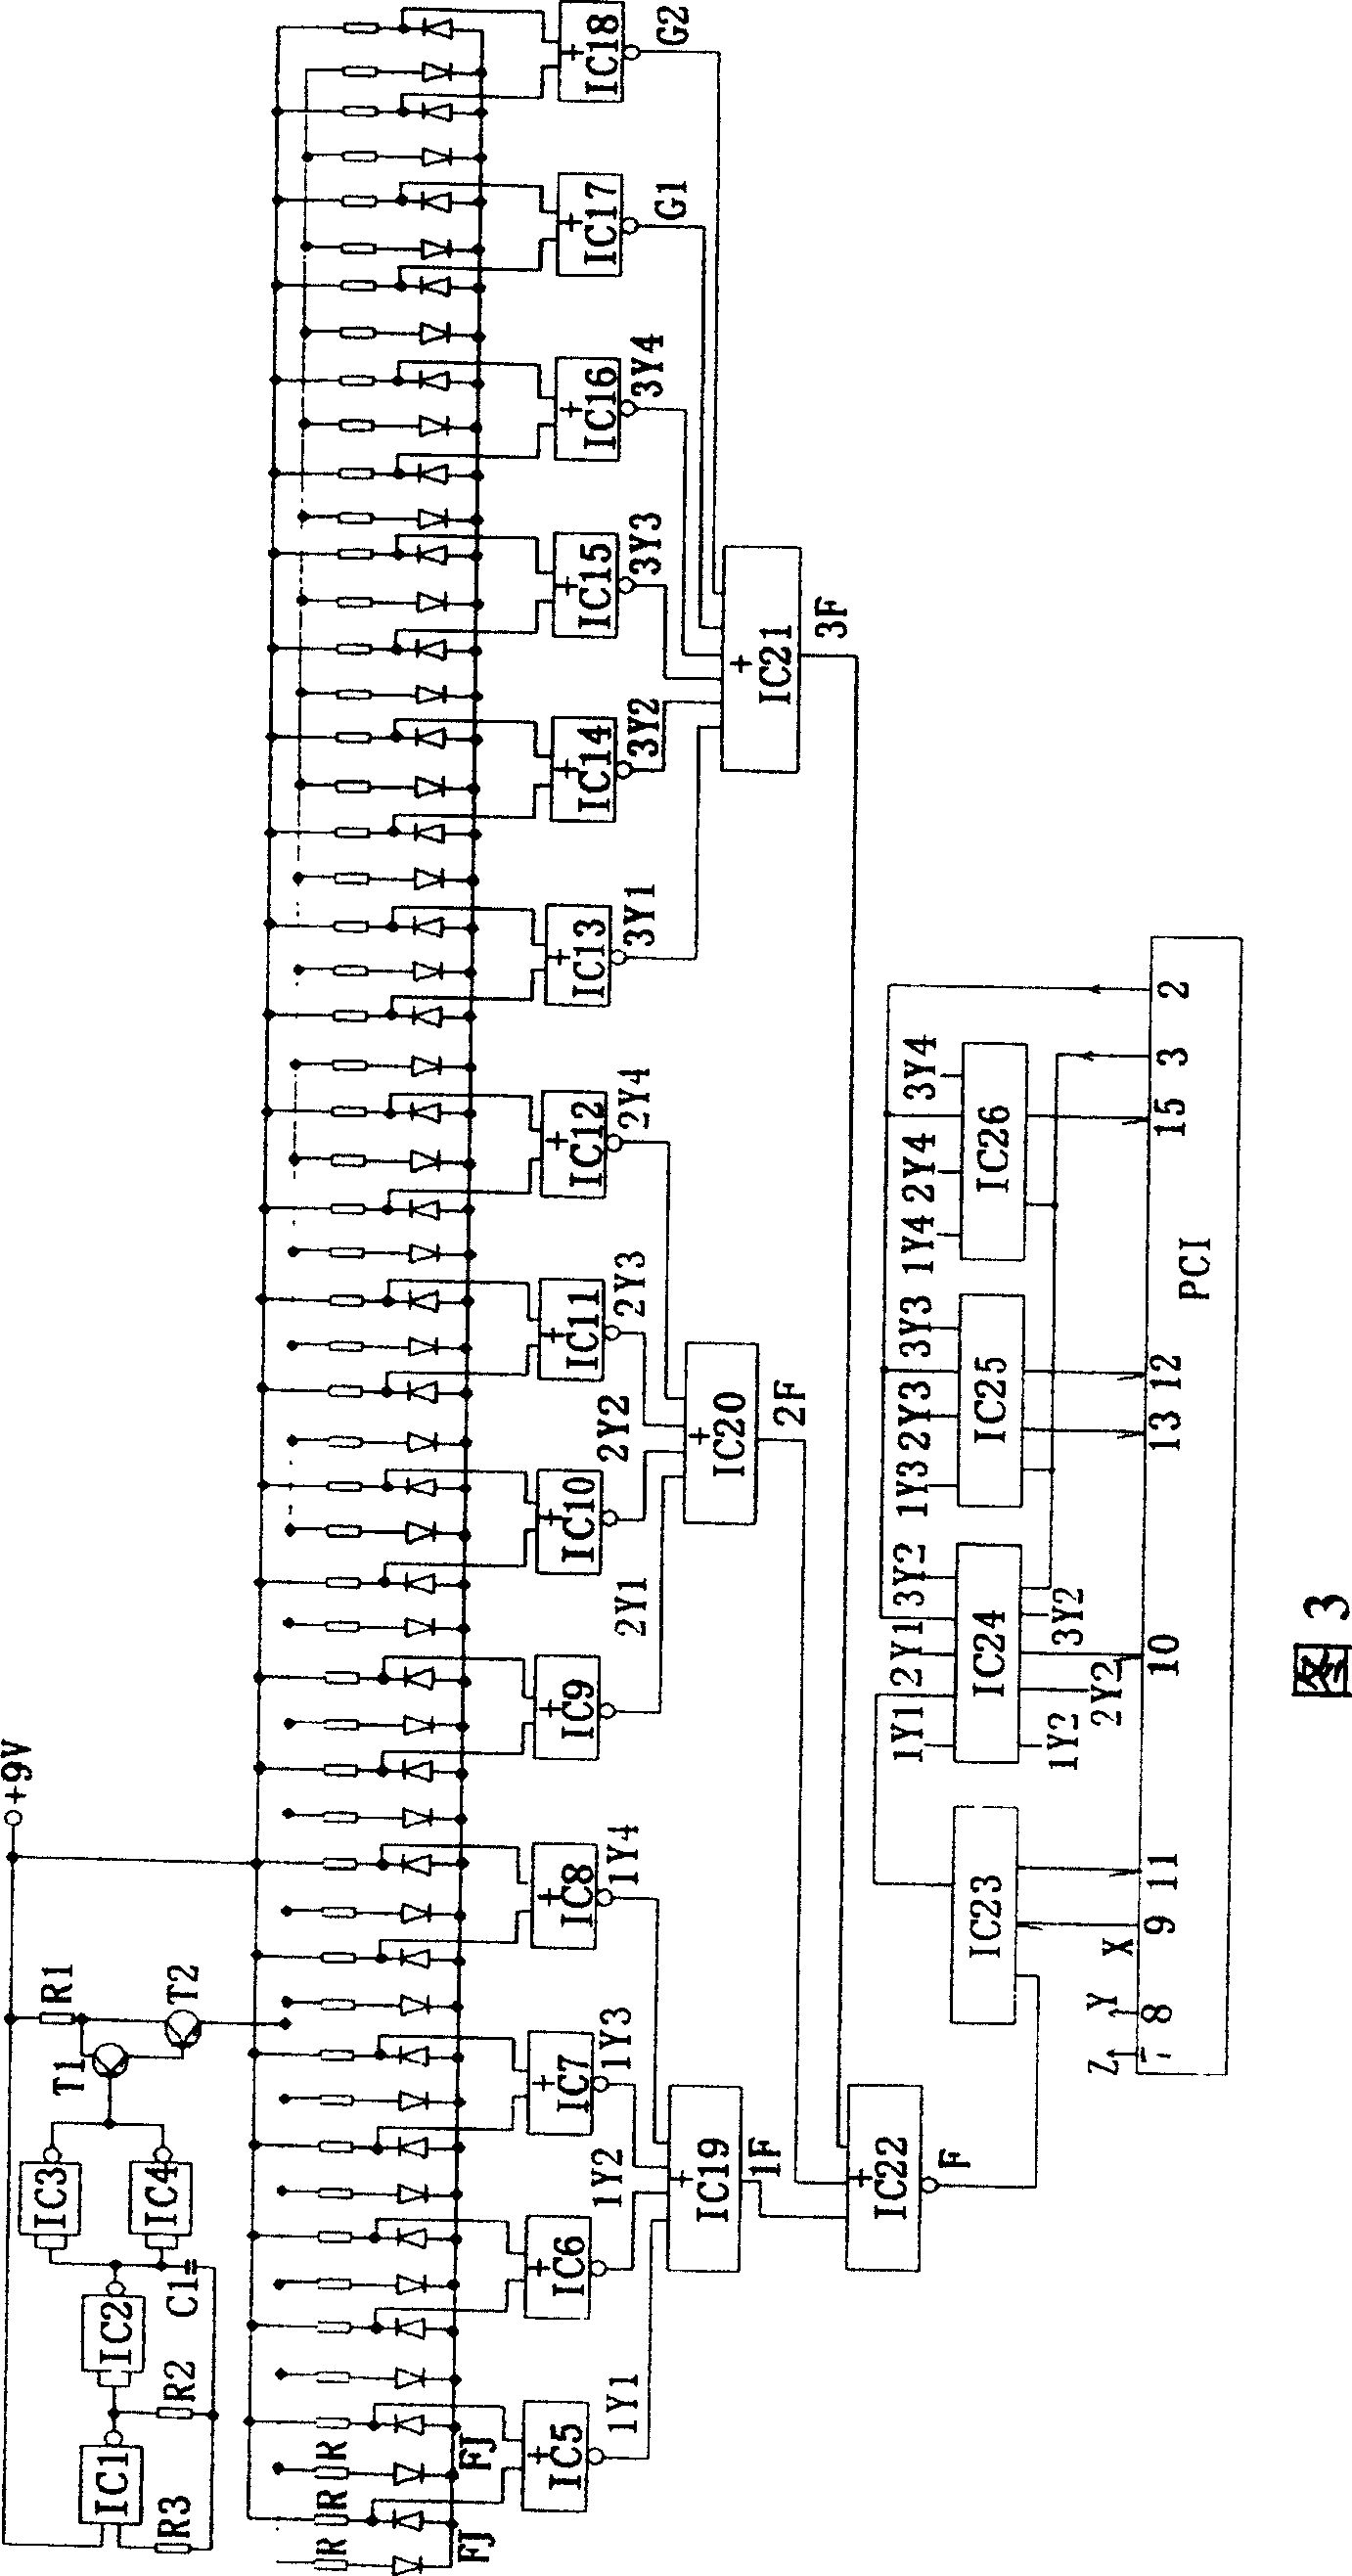 Mouse hearing and vision memory model and intelligent action inspecting system